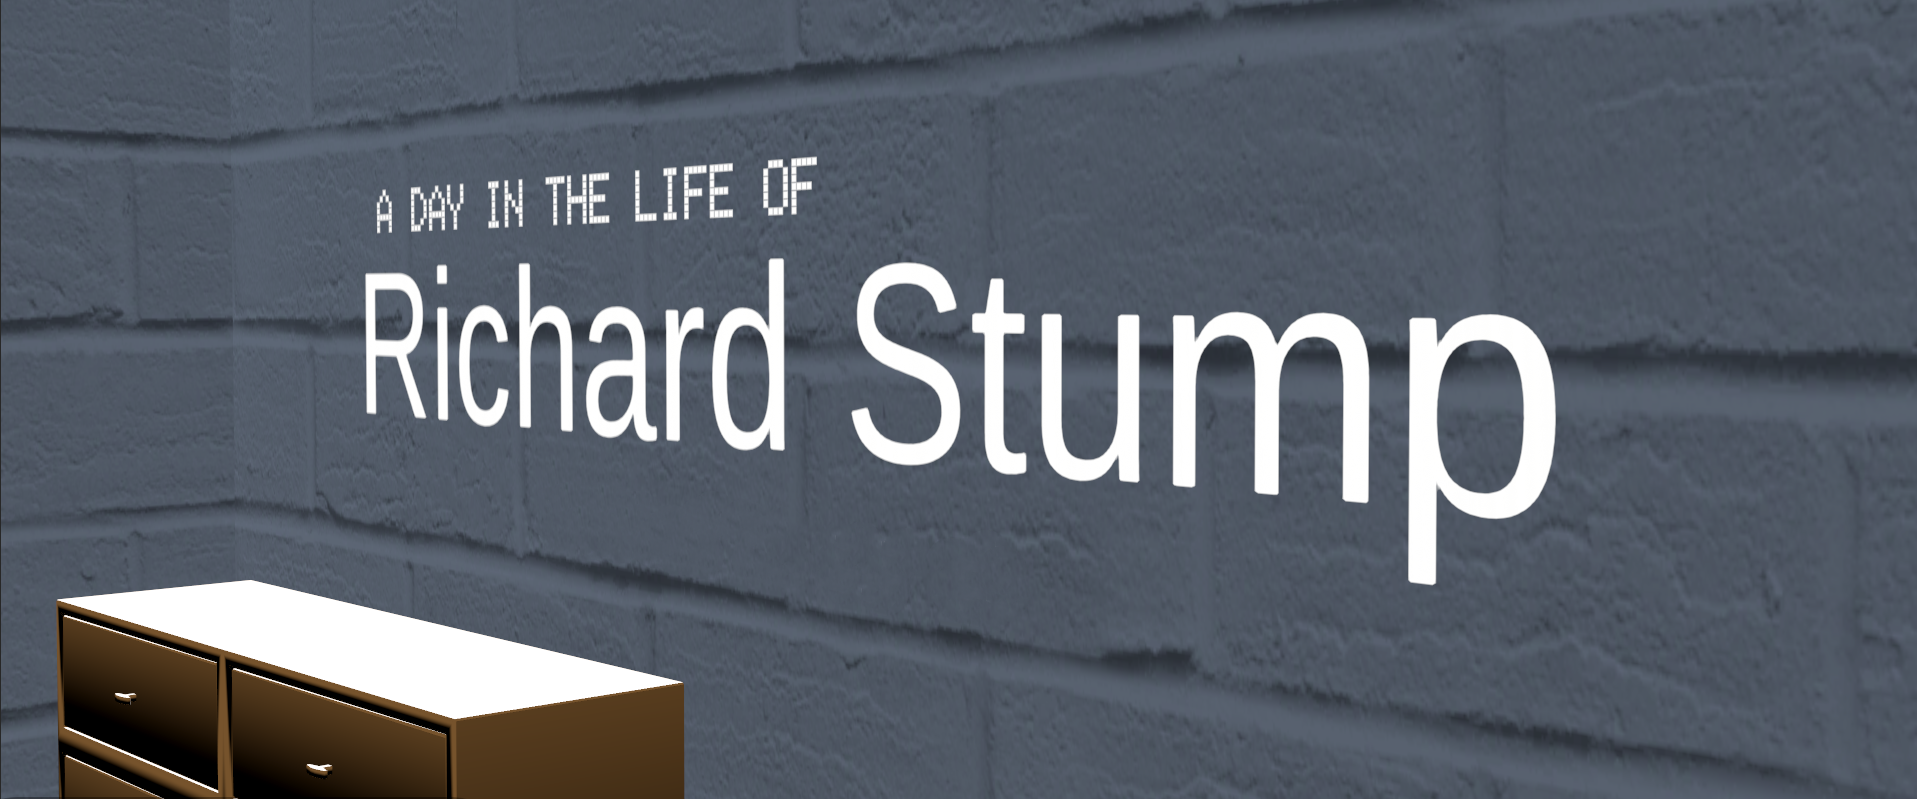 A Day in the Life of Richard Stump